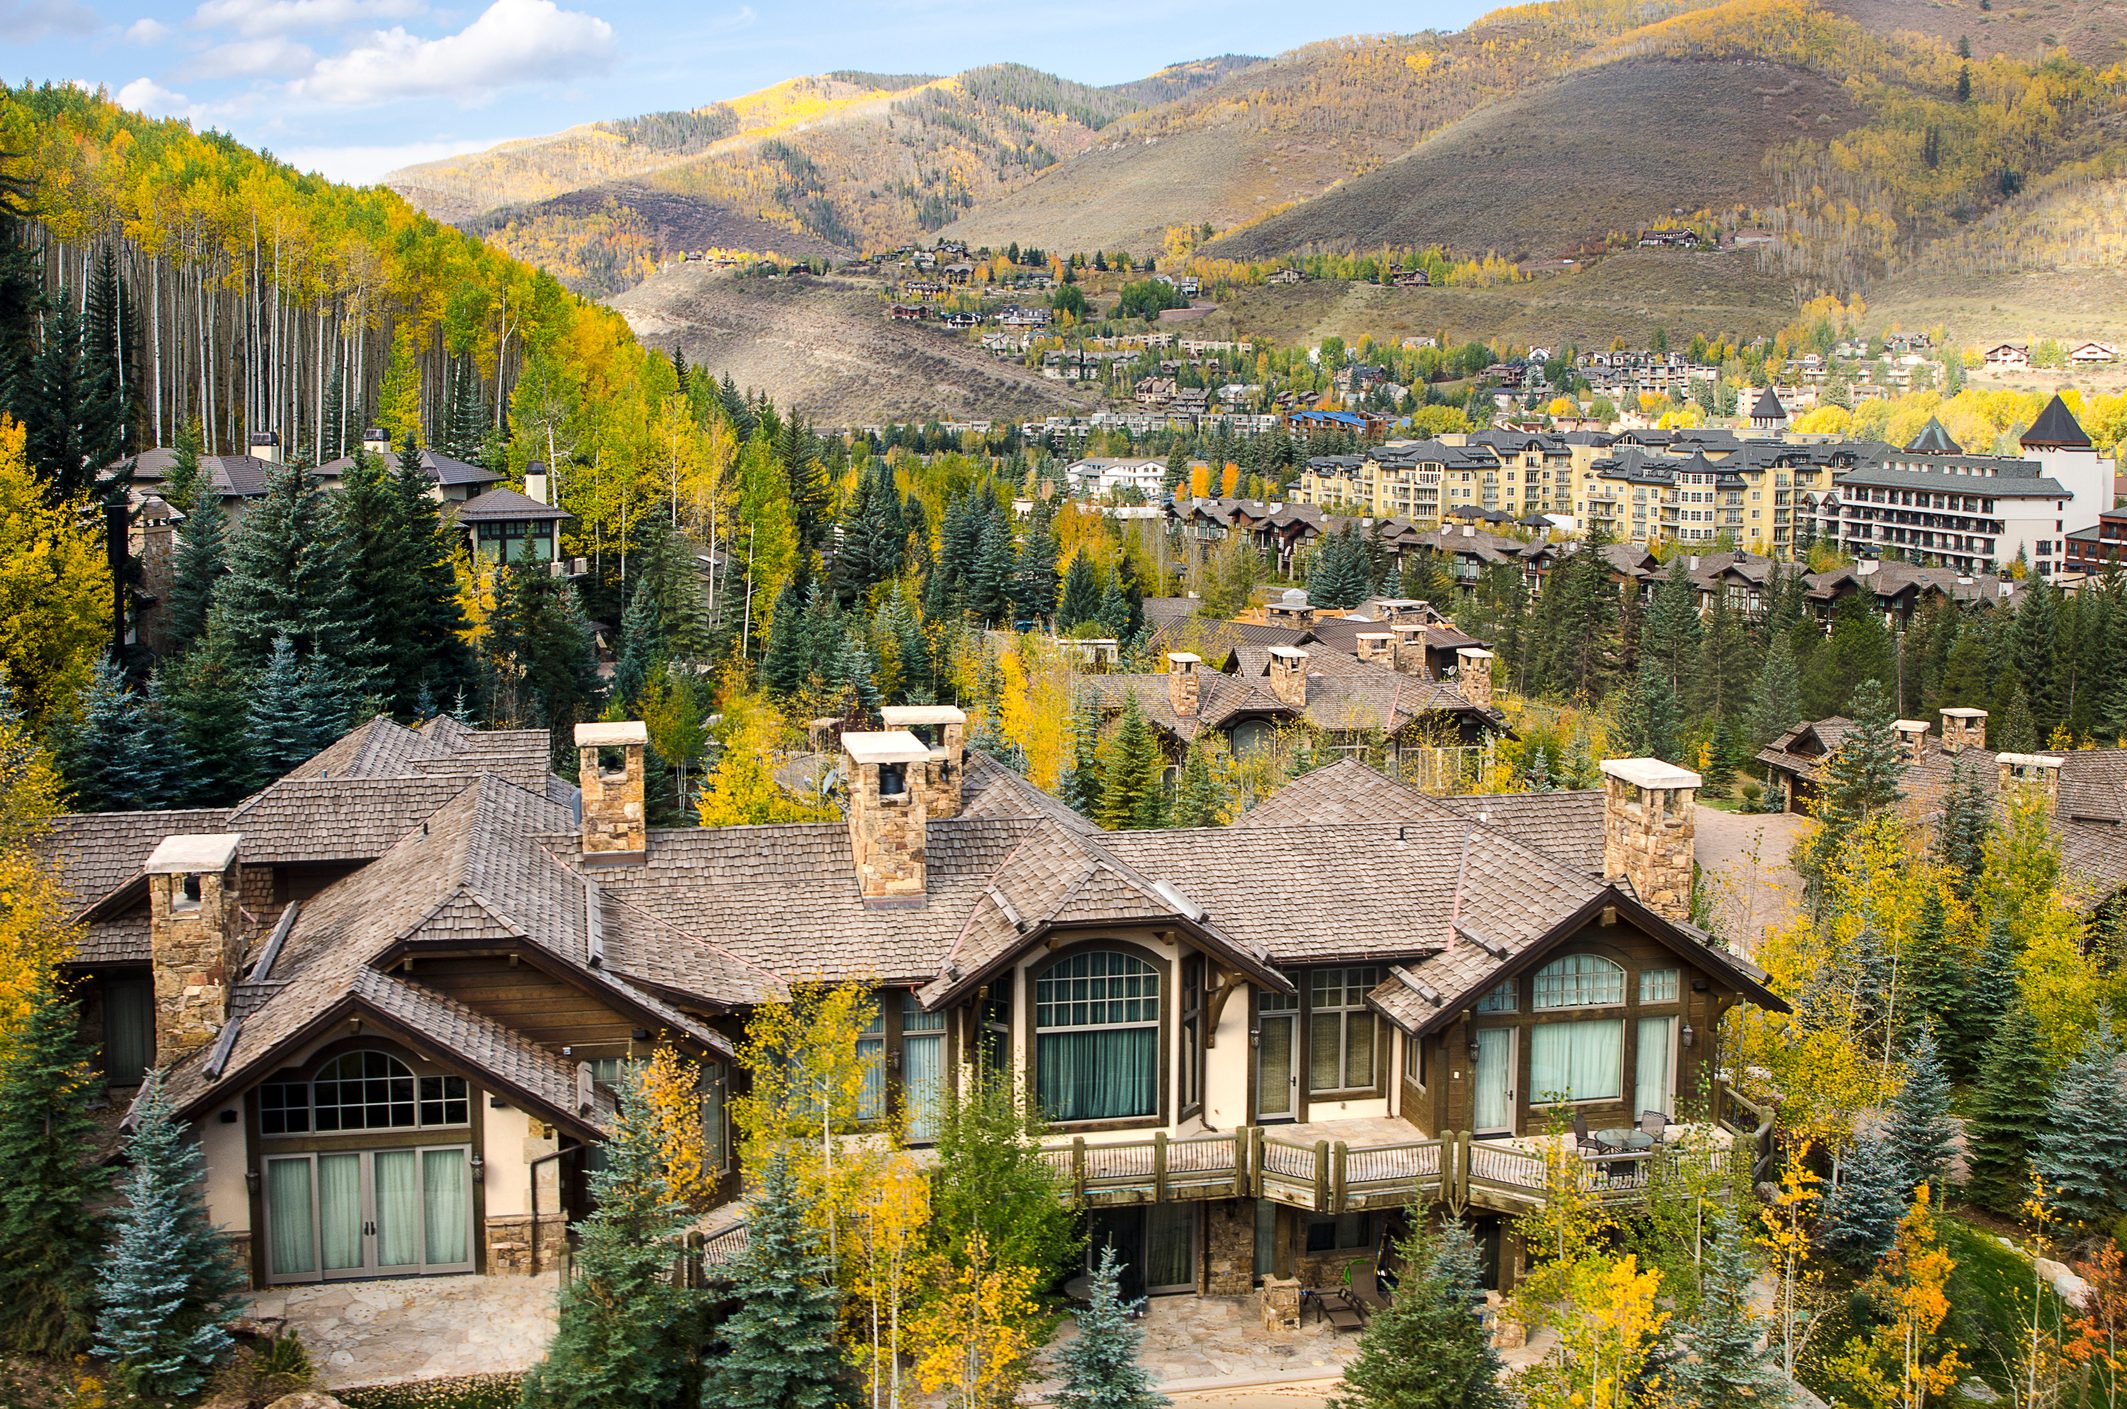 Mountain Resort Village of Vail, Colorado in the Rocky Mountains